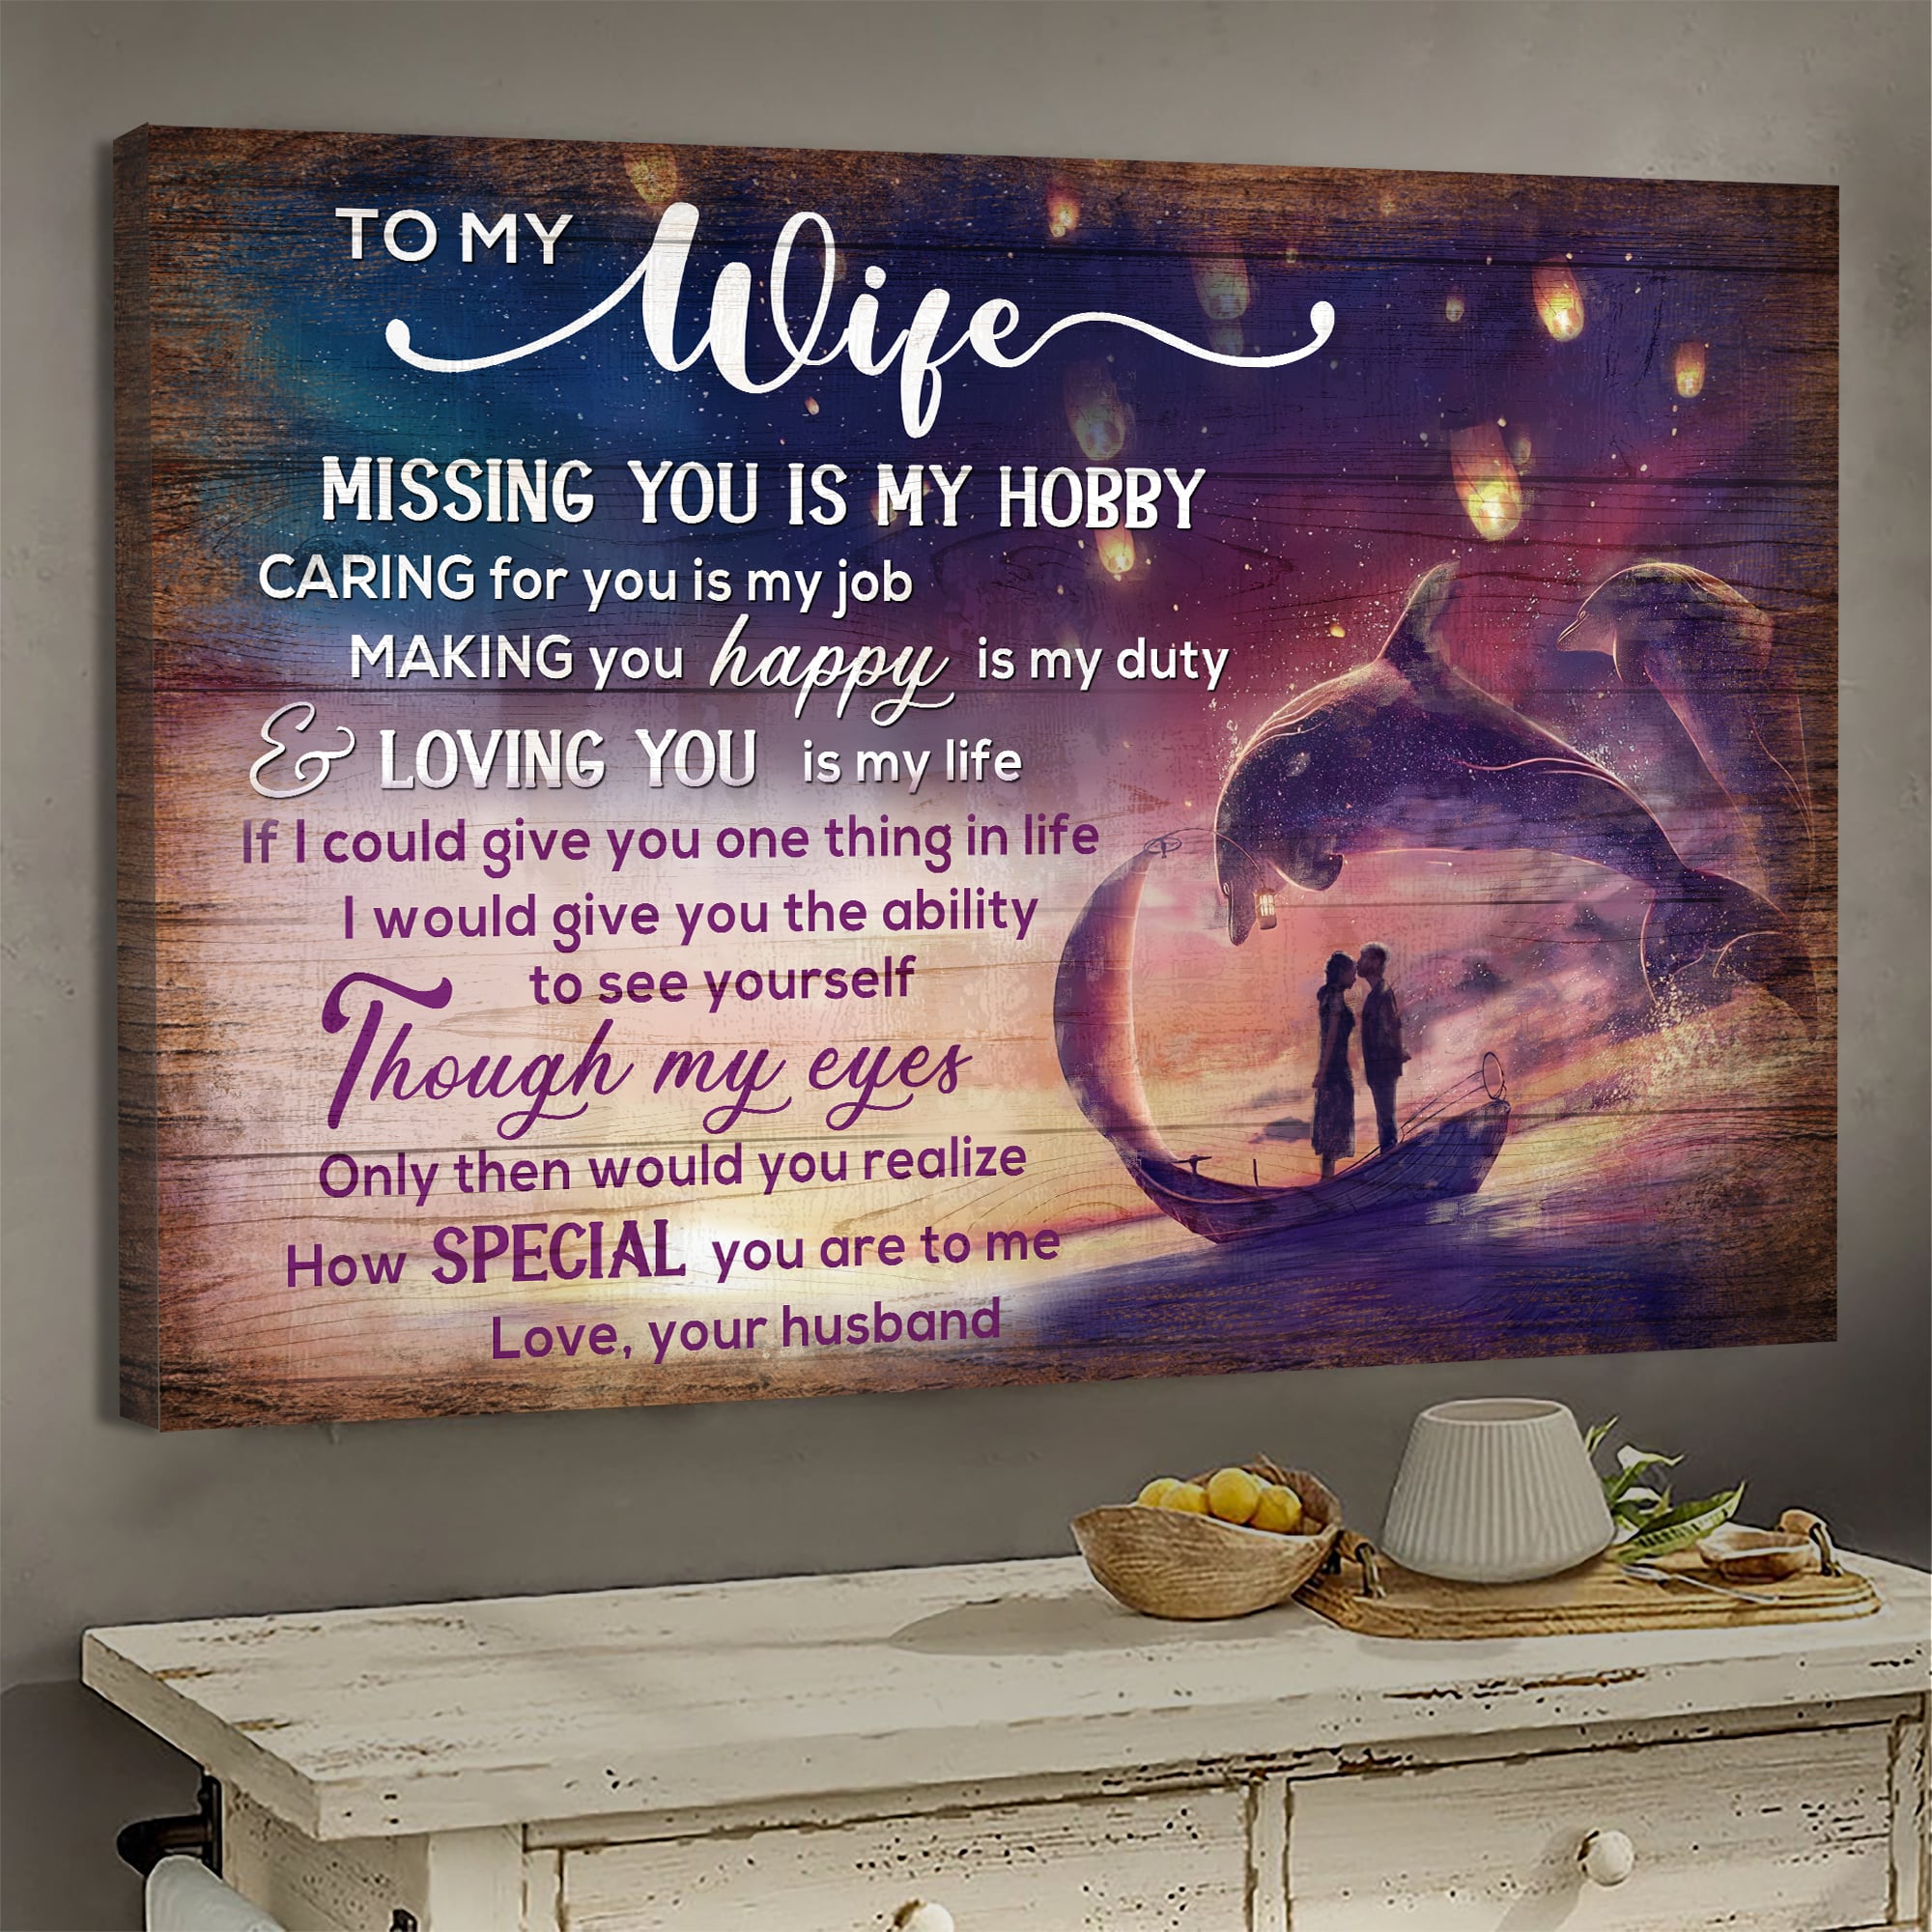 To my wife, Dolphin, Lantern, Couple standing on boat, Missing you is my hobby - Couple Landscape Canvas Prints, Wall Art